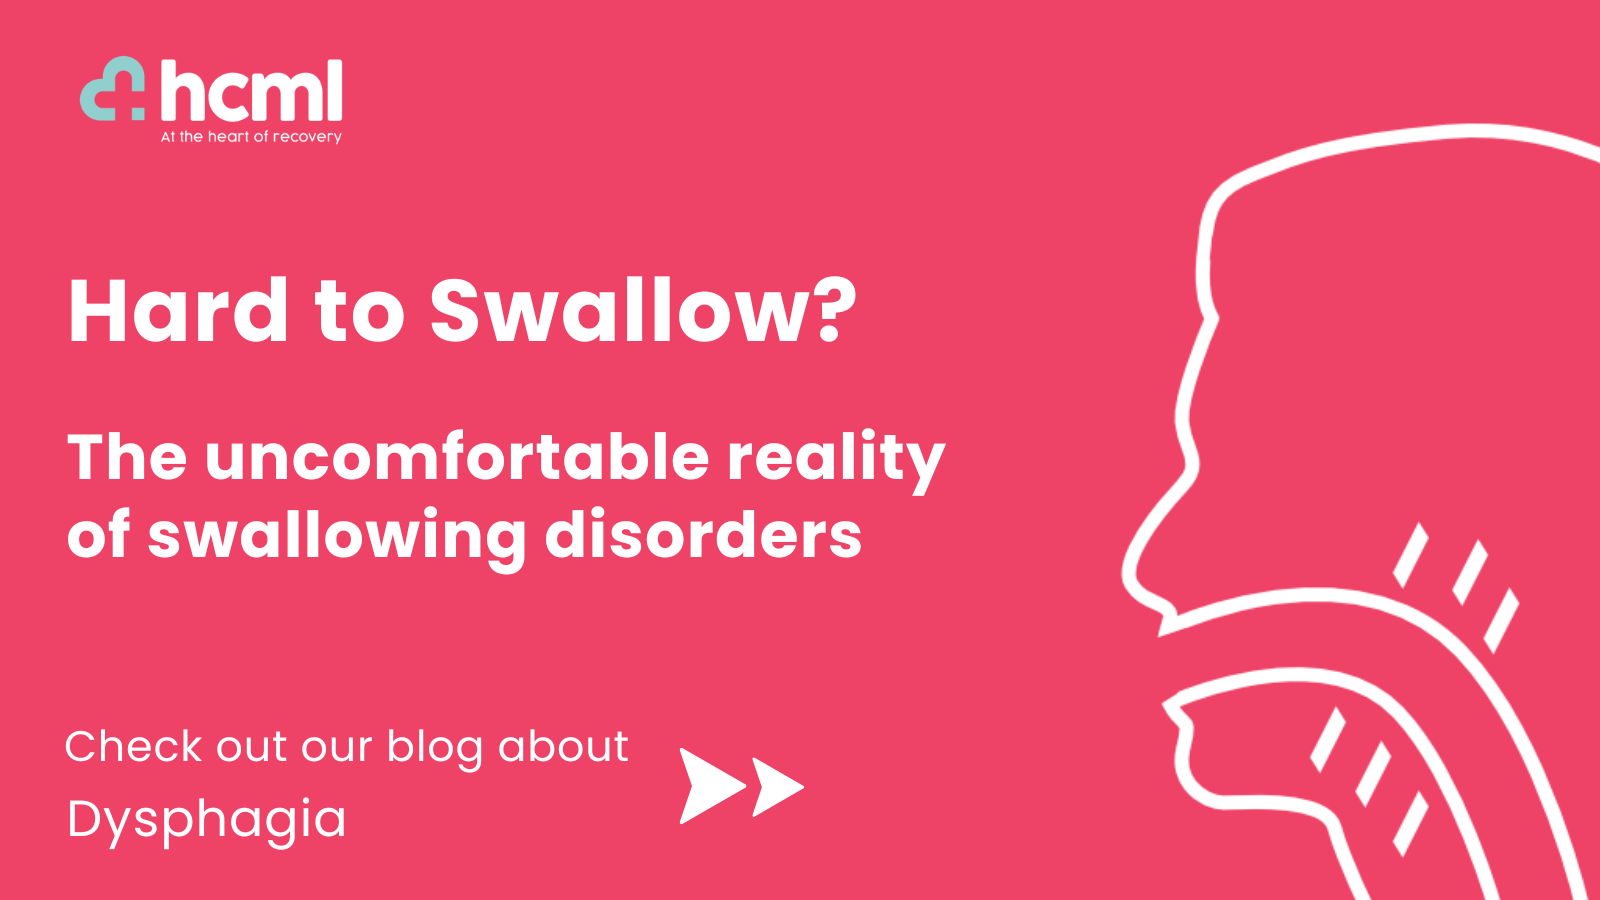 Hard to Swallow? The uncomfortable reality of swallowing disorders